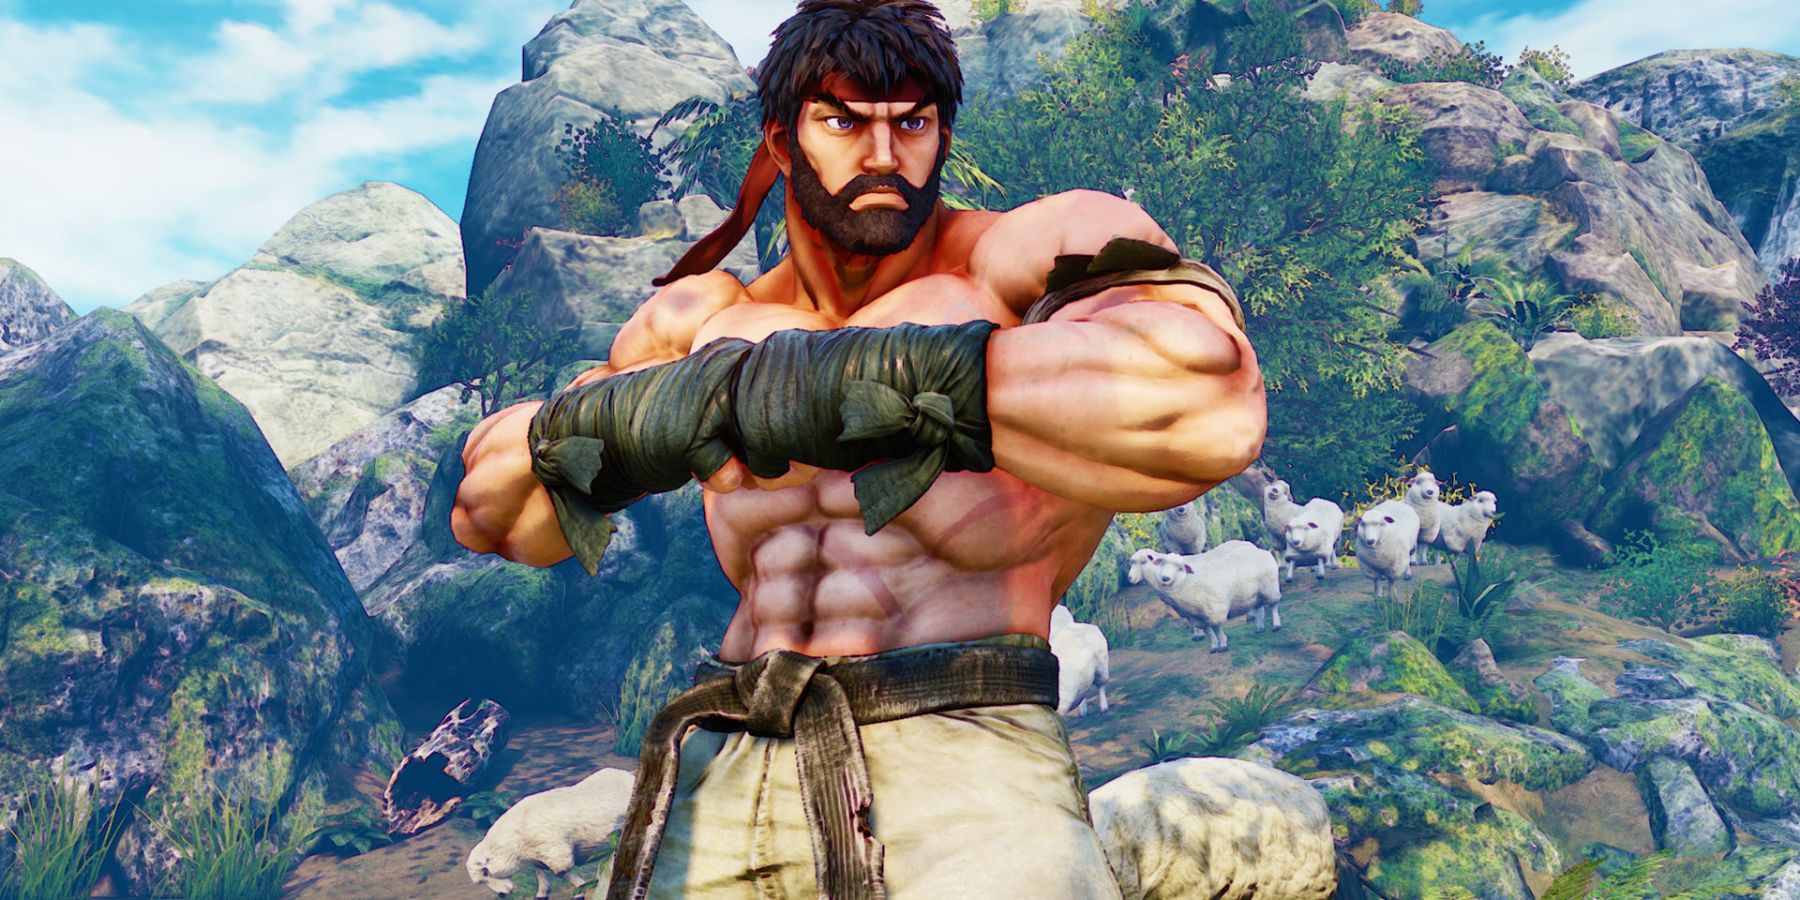 How Well Do You Know Ryu From The Street Fighter Series?